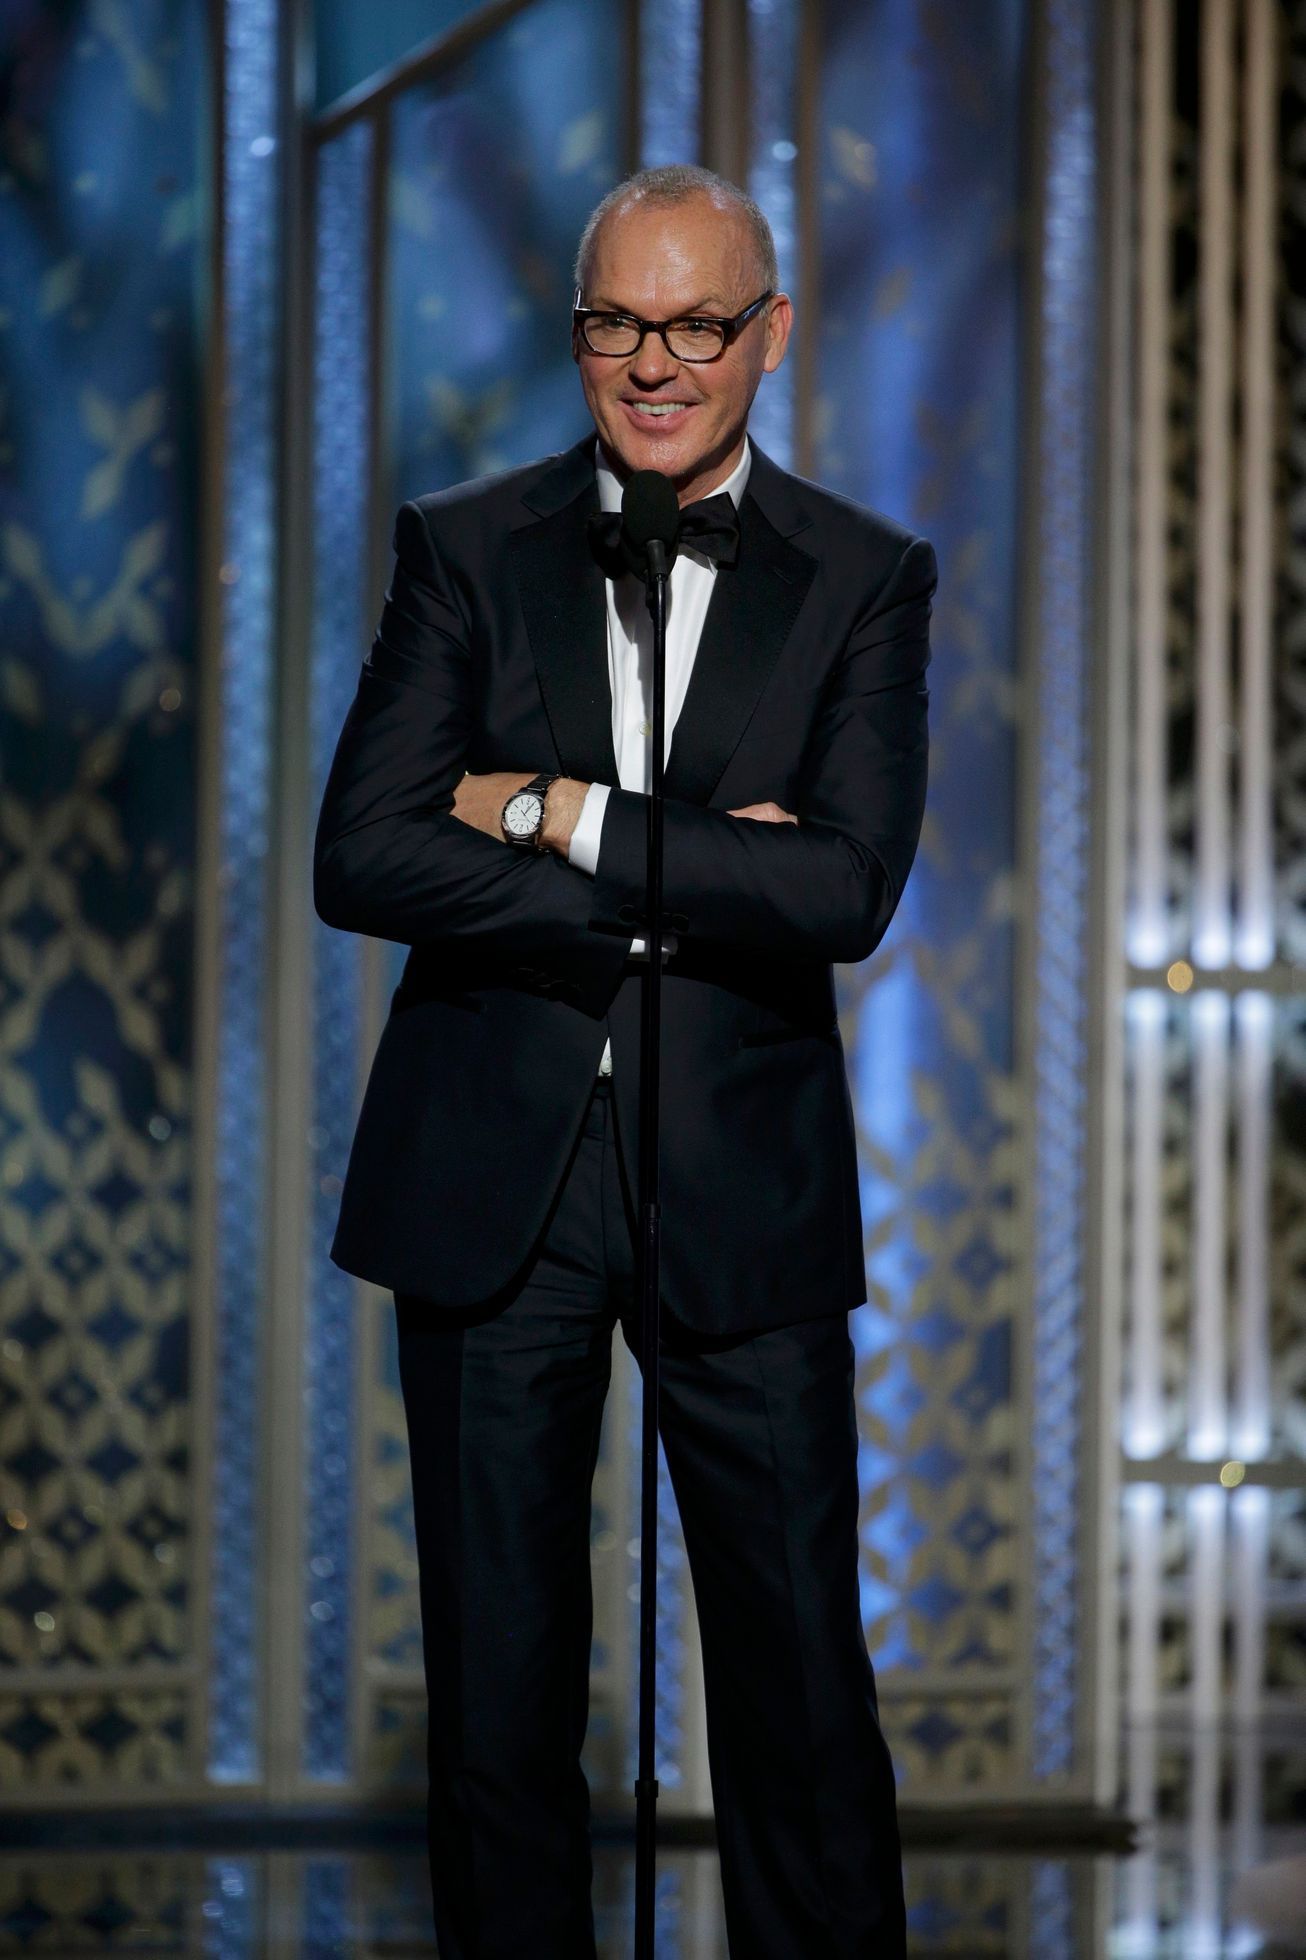 Actor Michael Keaton accepts the Golden Globe Award for Best Actor - Motion Picture, Comedy or Musical for &quot;Birdman&quot; at the 72nd Golden Globe Awards in Beverly Hills